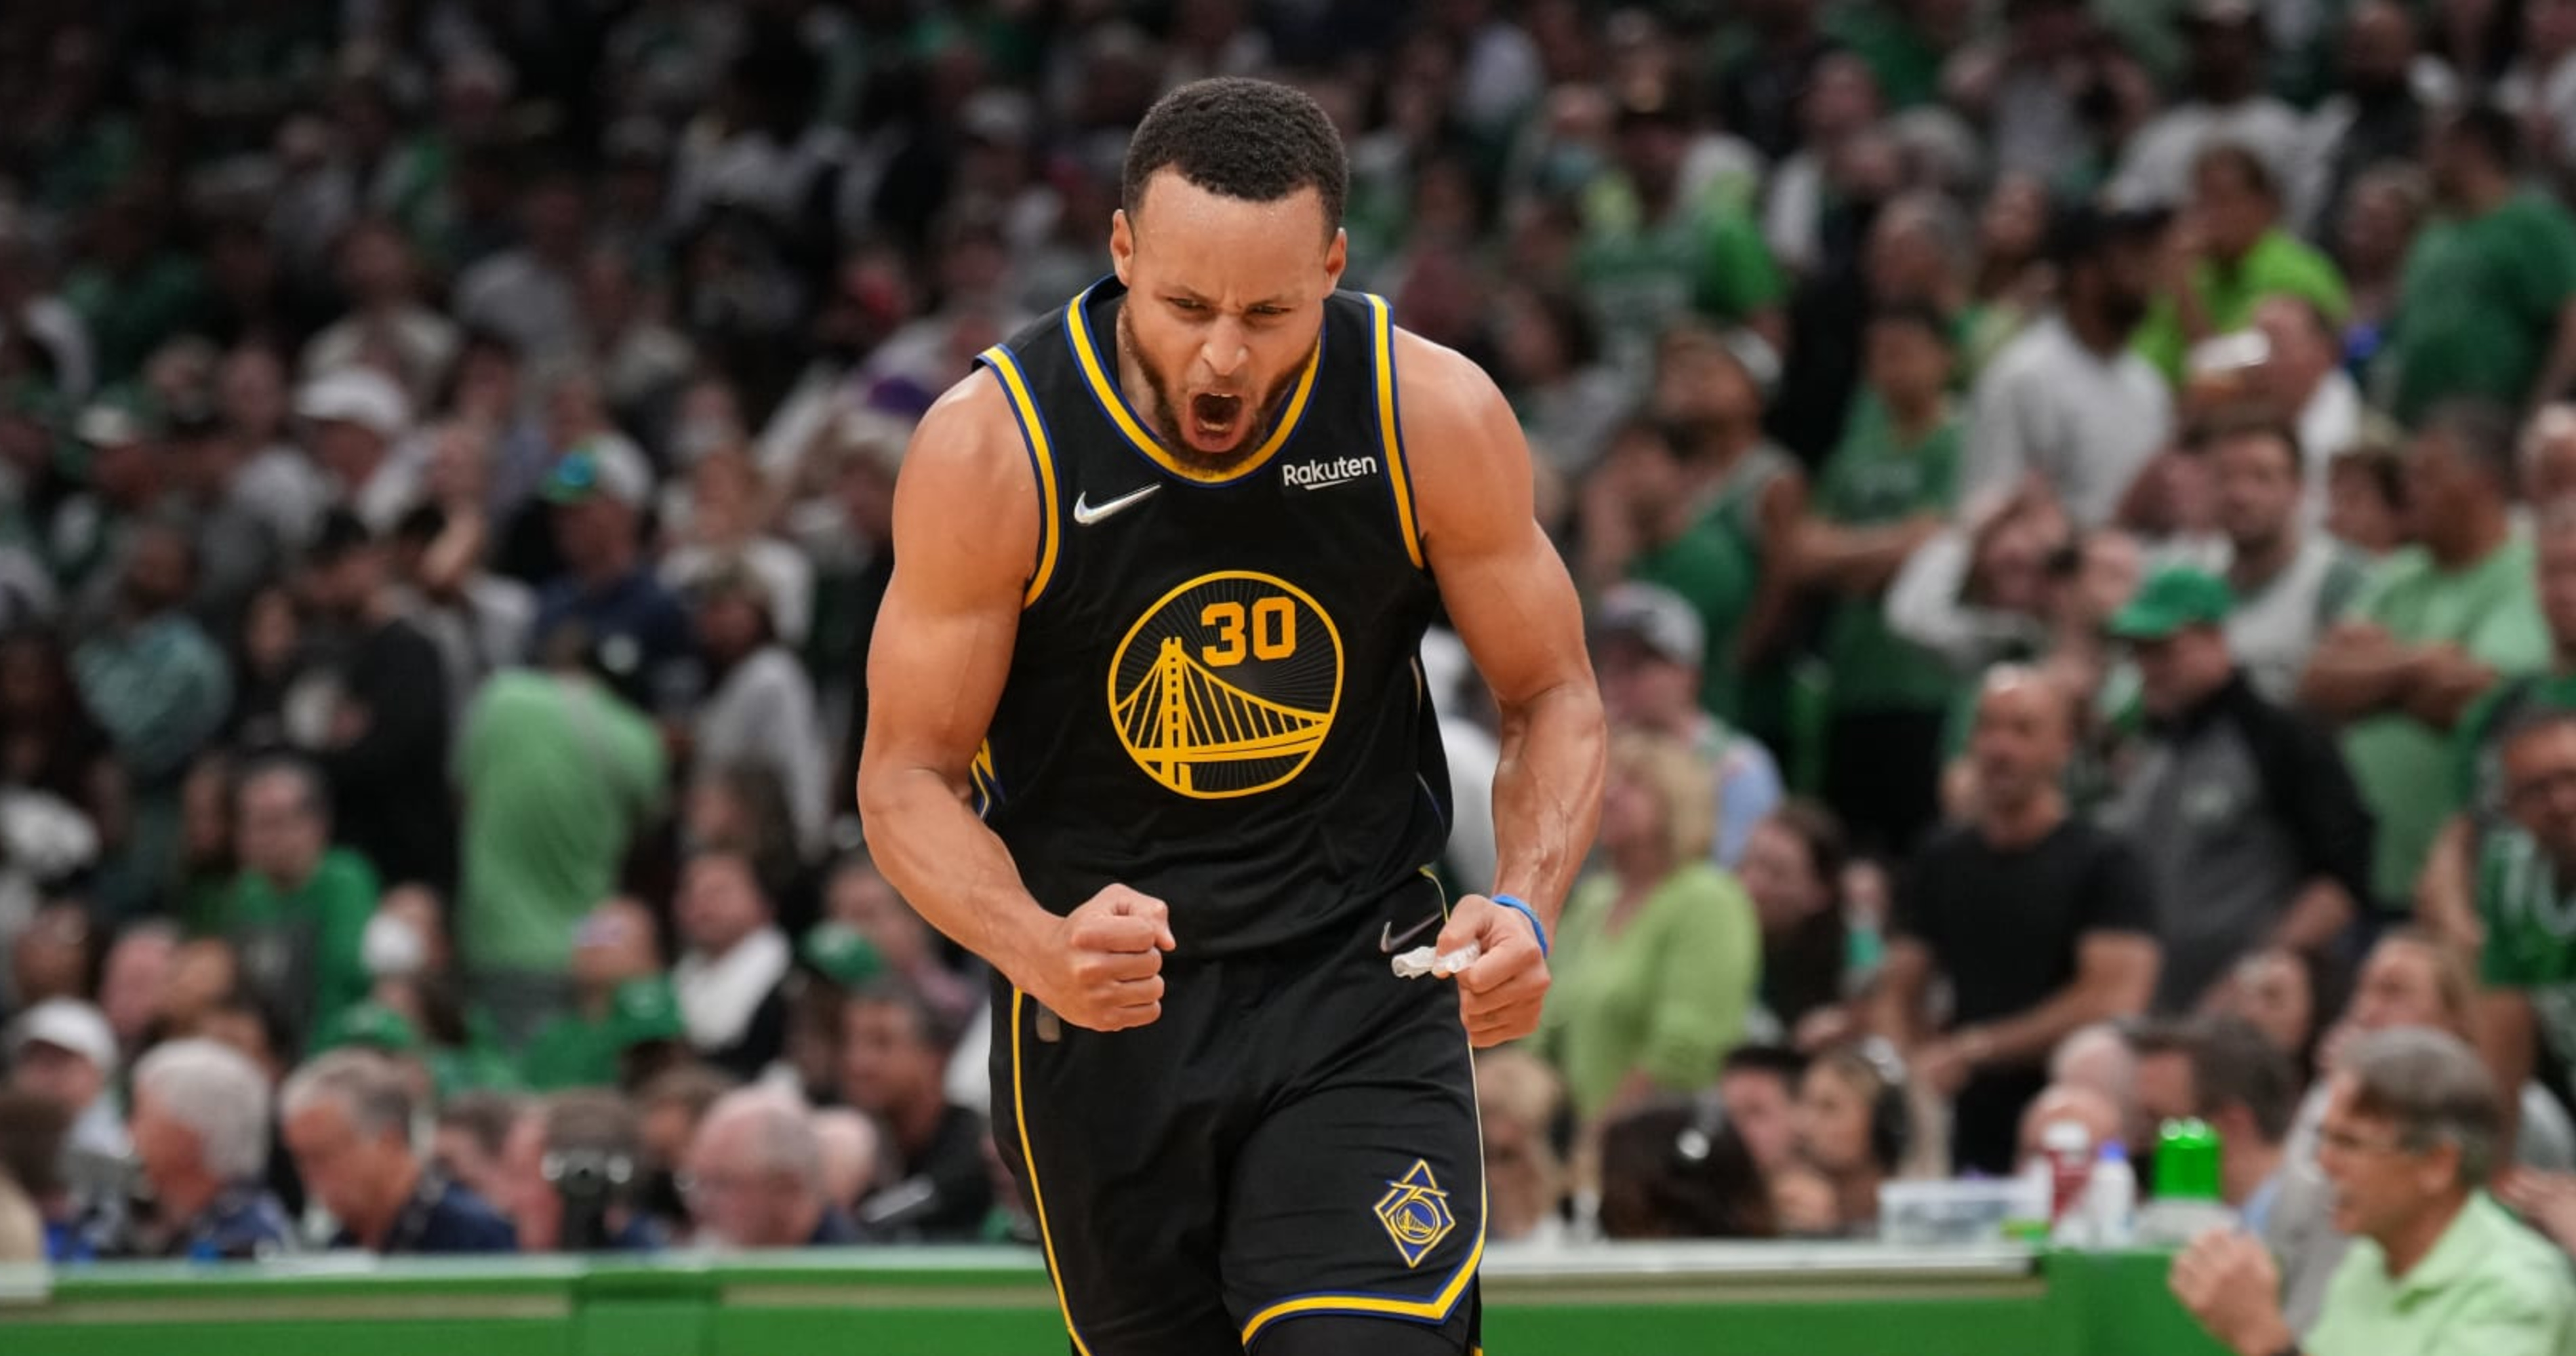 NBA Finals: Steph Curry puts the Warriors on his back in Game 4 vs